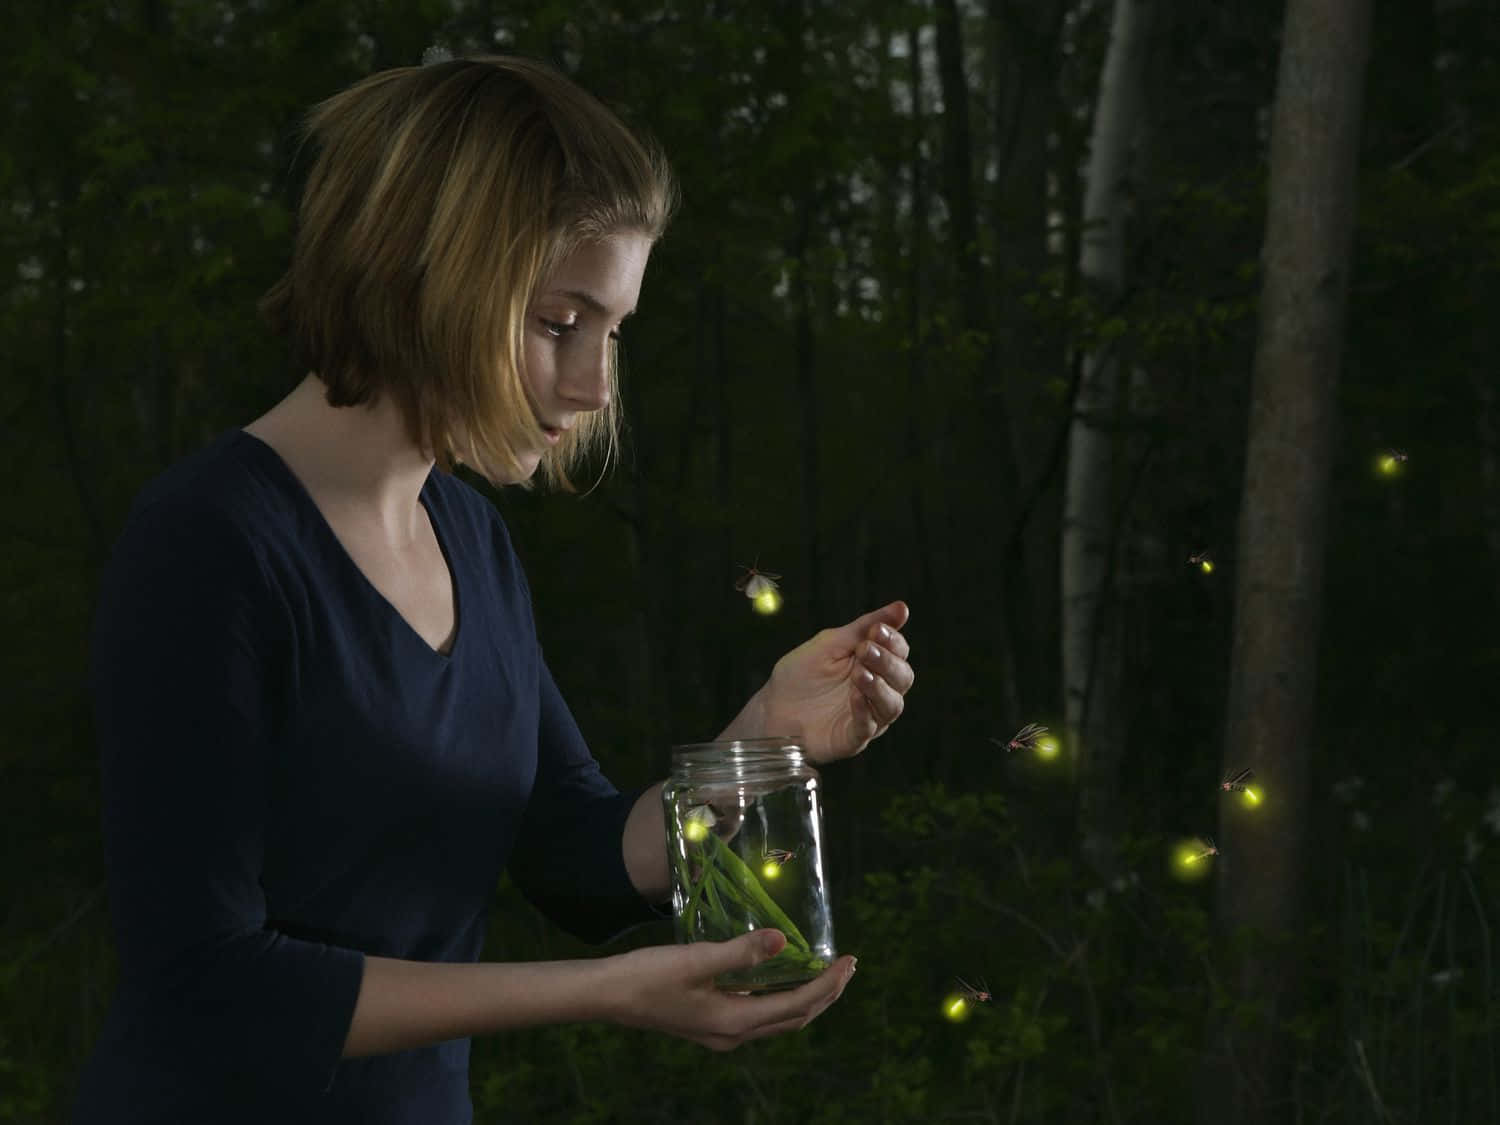 Enjoy the beauty of fireflies in nature